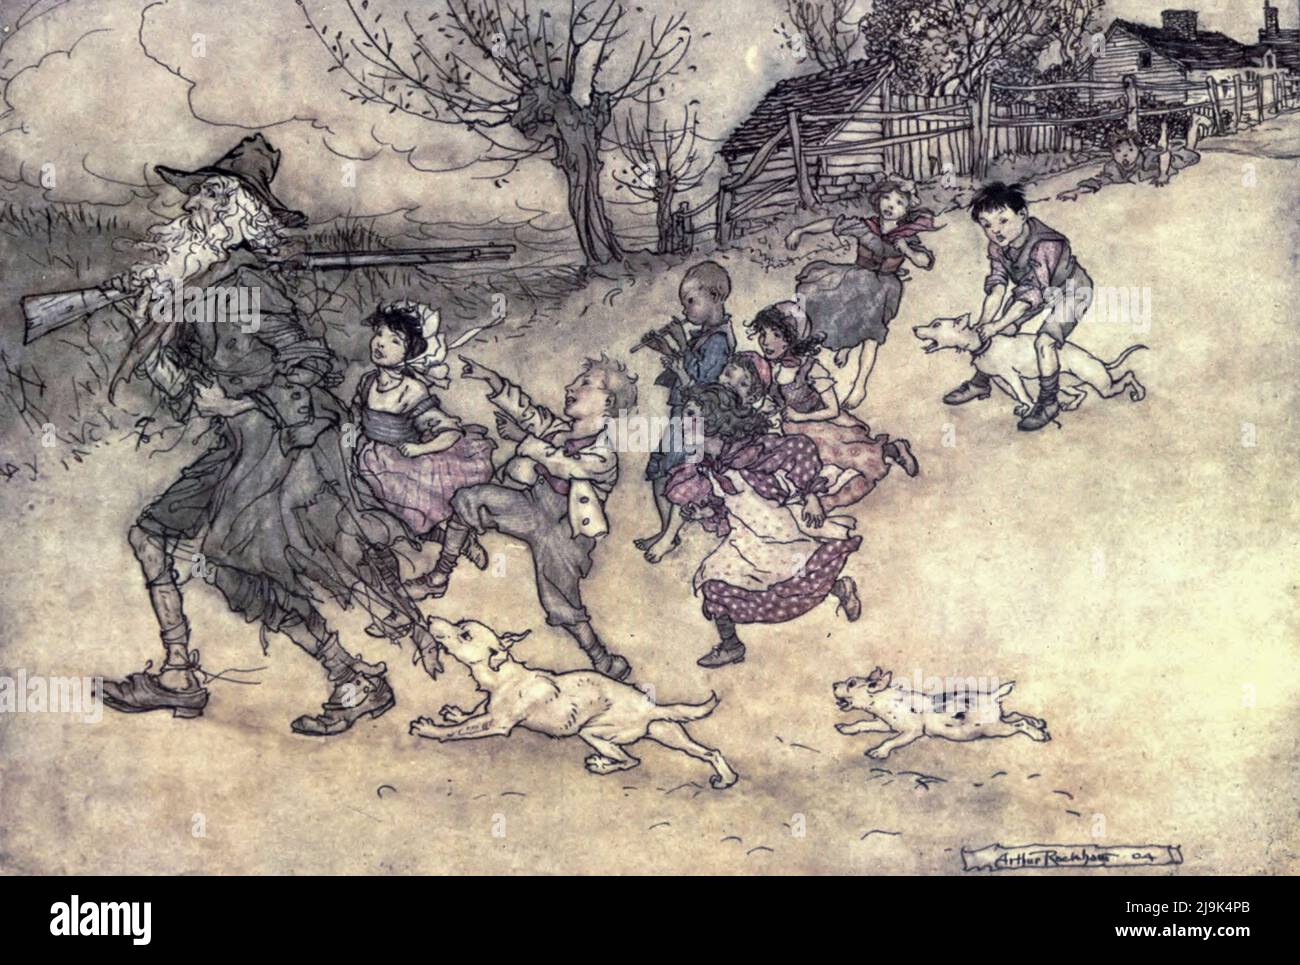 A troop of strange children ran at his heels, hooting after him and pointing at his grey beard from the book ' Rip Van Winkle ' by Washington Irving, 1783-1859; Illustrated by Arthur Rackham, 1867-1939 Publication date 1919  Publisher New York Doubleday, Page 'Rip Van Winkle' is a short story by the American author Washington Irving, first published in 1819. It follows a Dutch-American villager in colonial America named Rip Van Winkle who meets mysterious Dutchmen, imbibes their liquor and falls asleep in the Catskill Mountains. He awakes 20 years later to a very changed world, having missed t Stock Photo